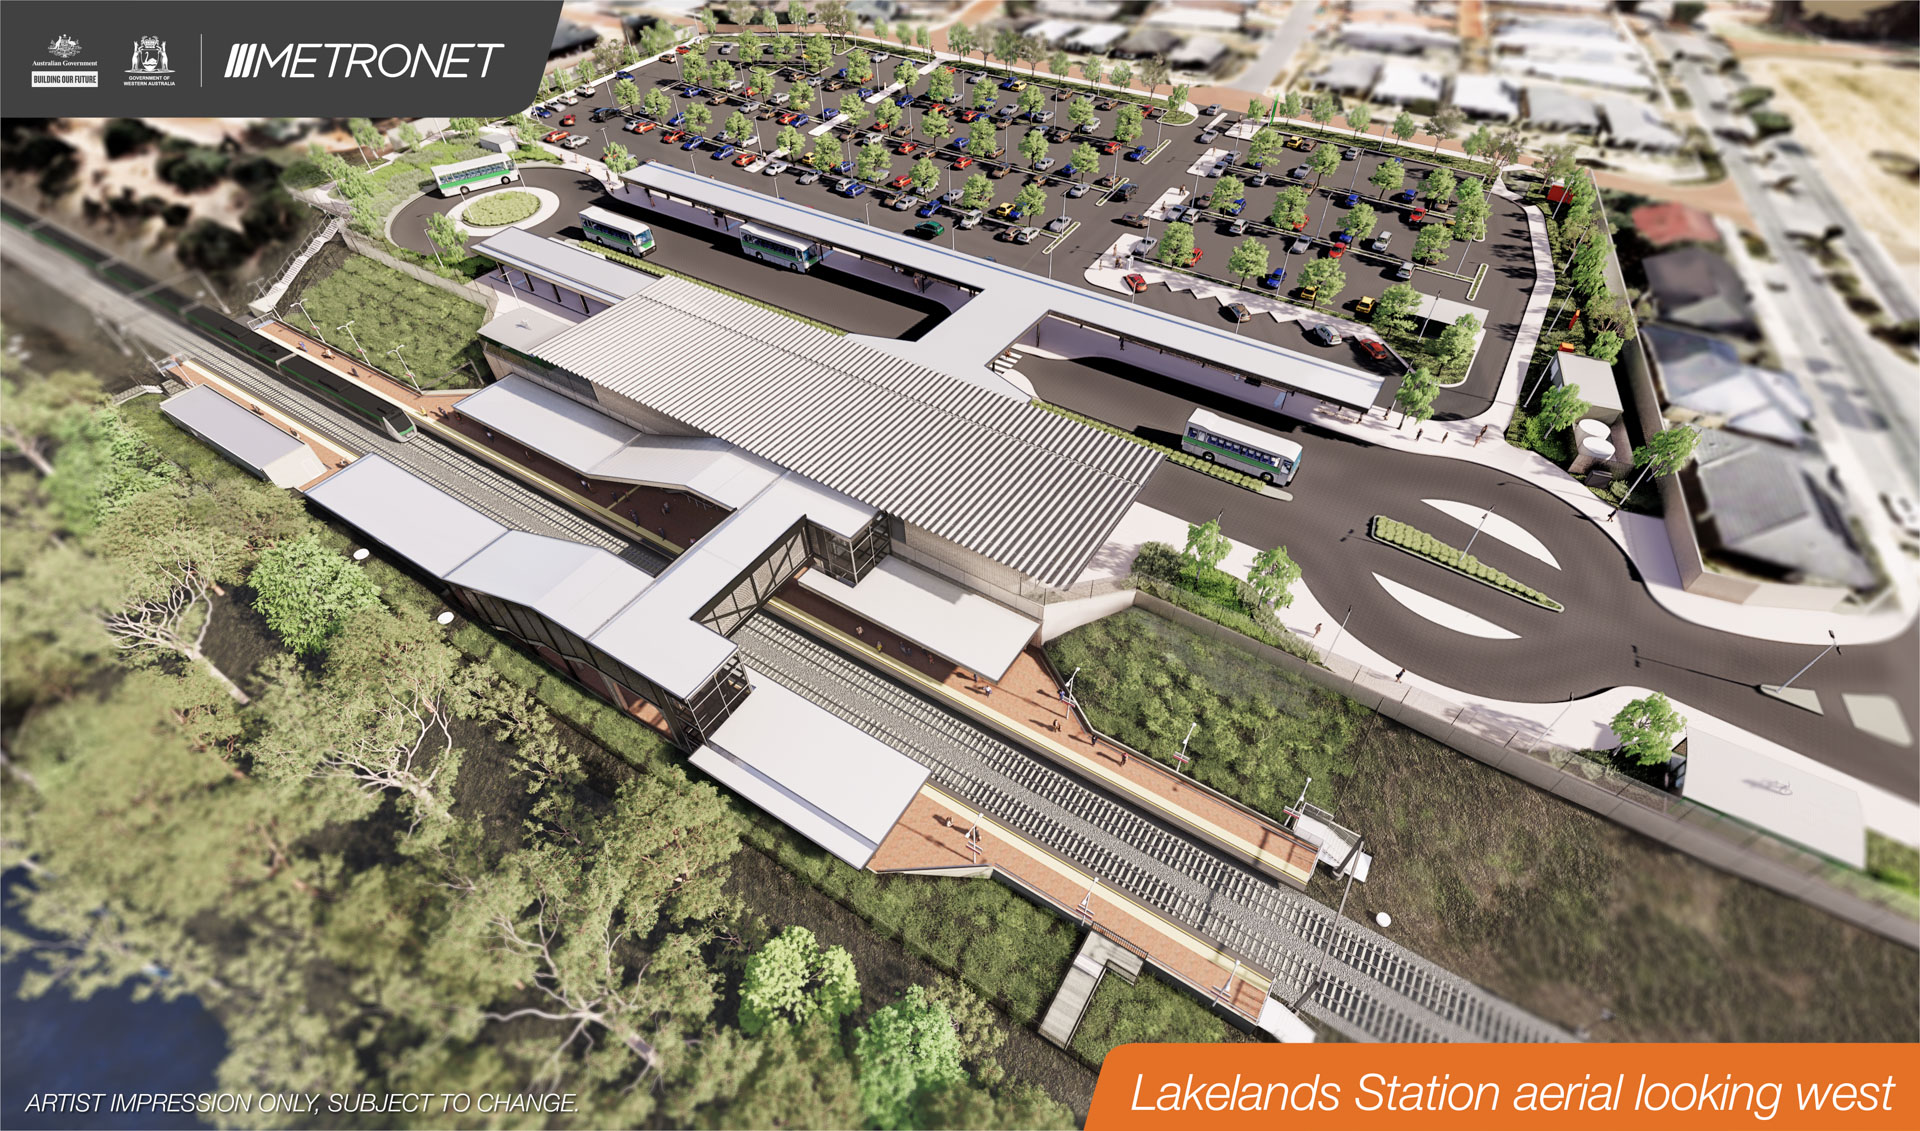 Artist Impression of Lakelands Station from an aerial view looking west